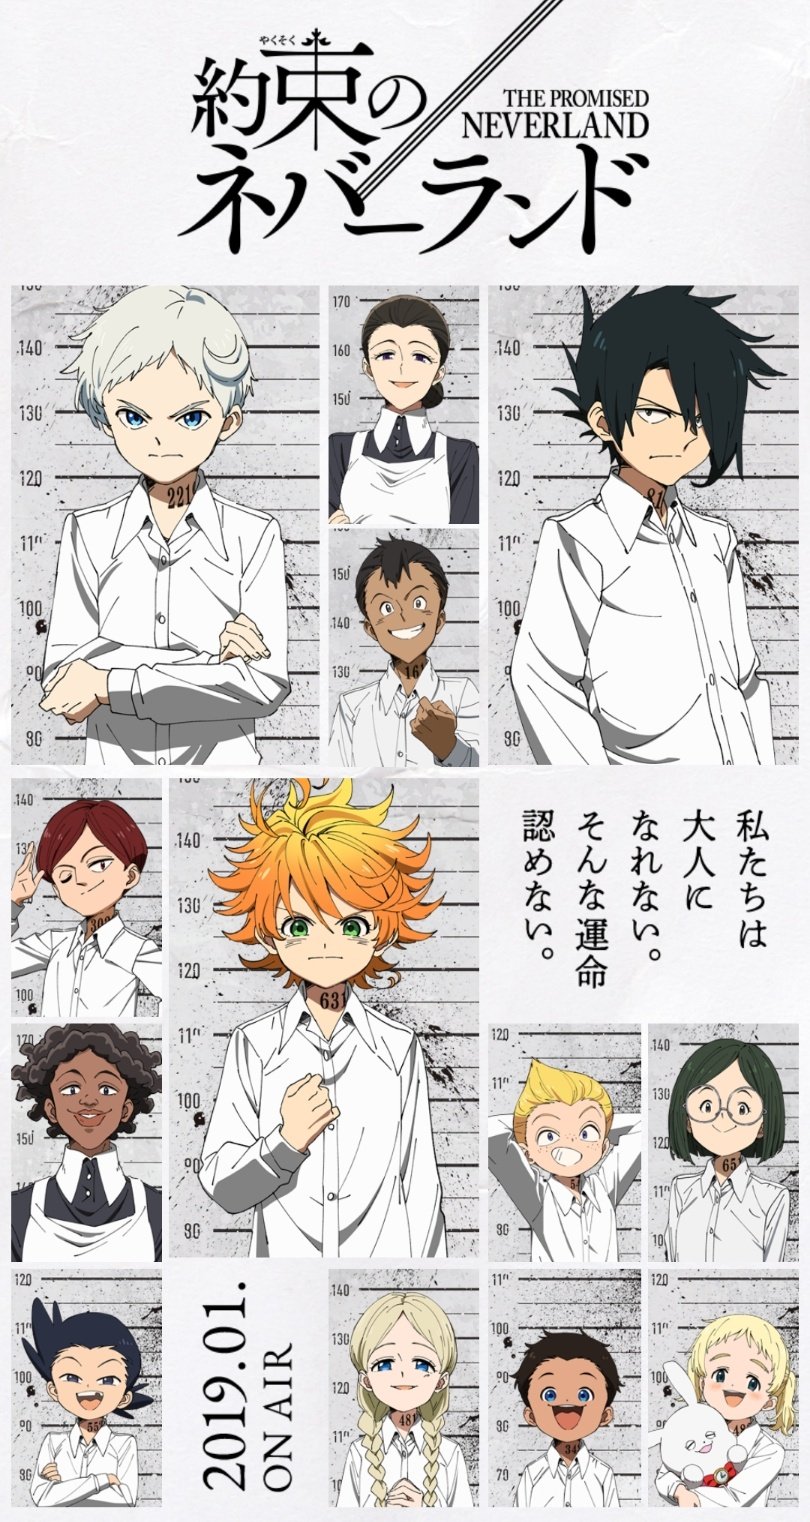 List of The Promised Neverland chapters - Wikipedia